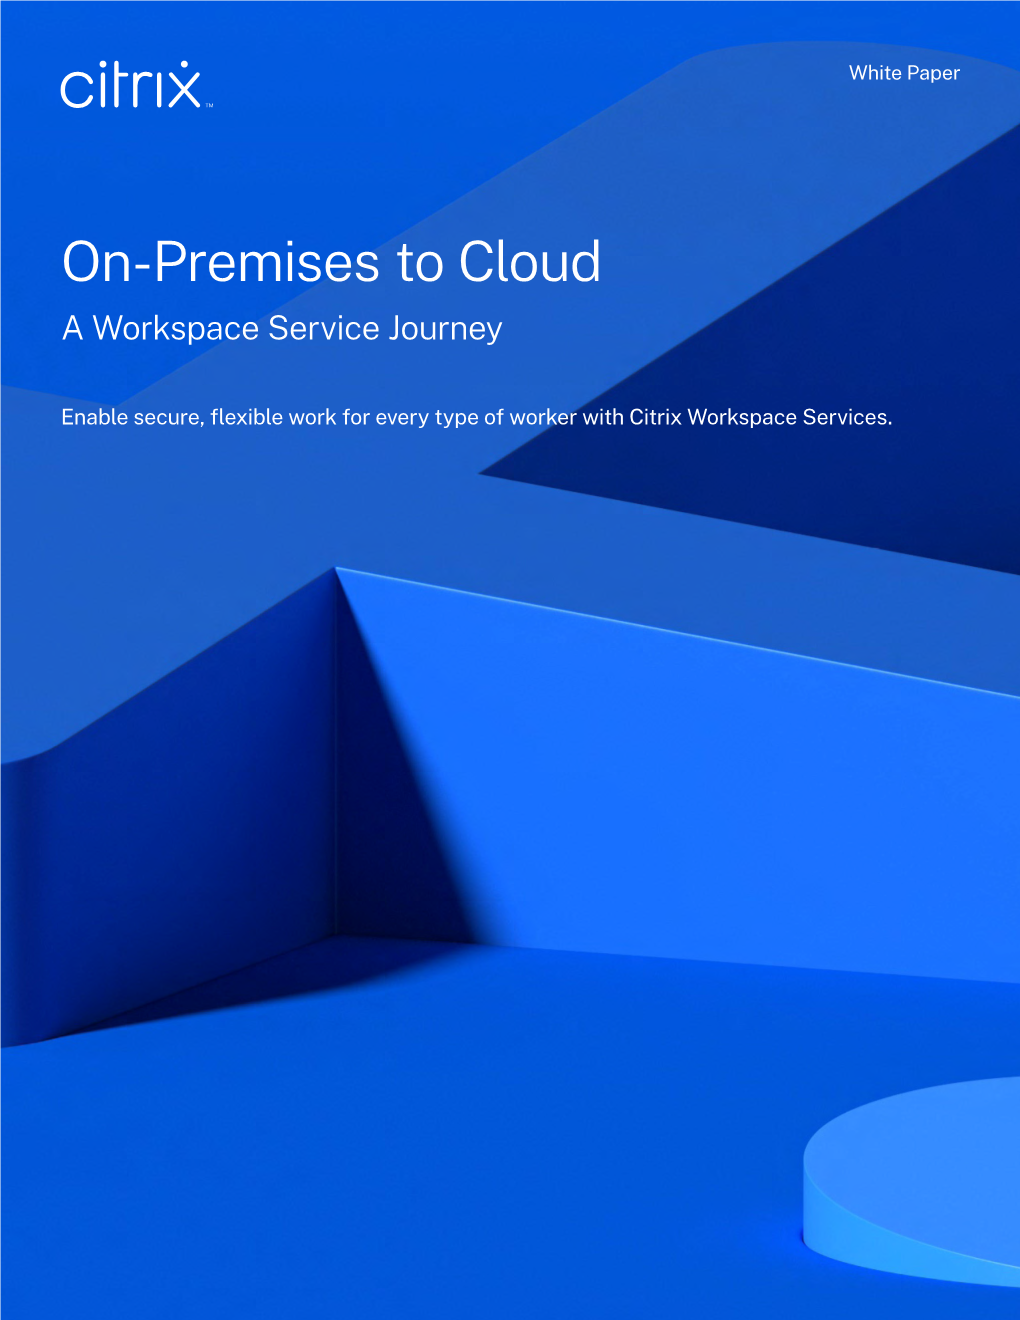 From On-Premises to Cloud with Citrix Workspace